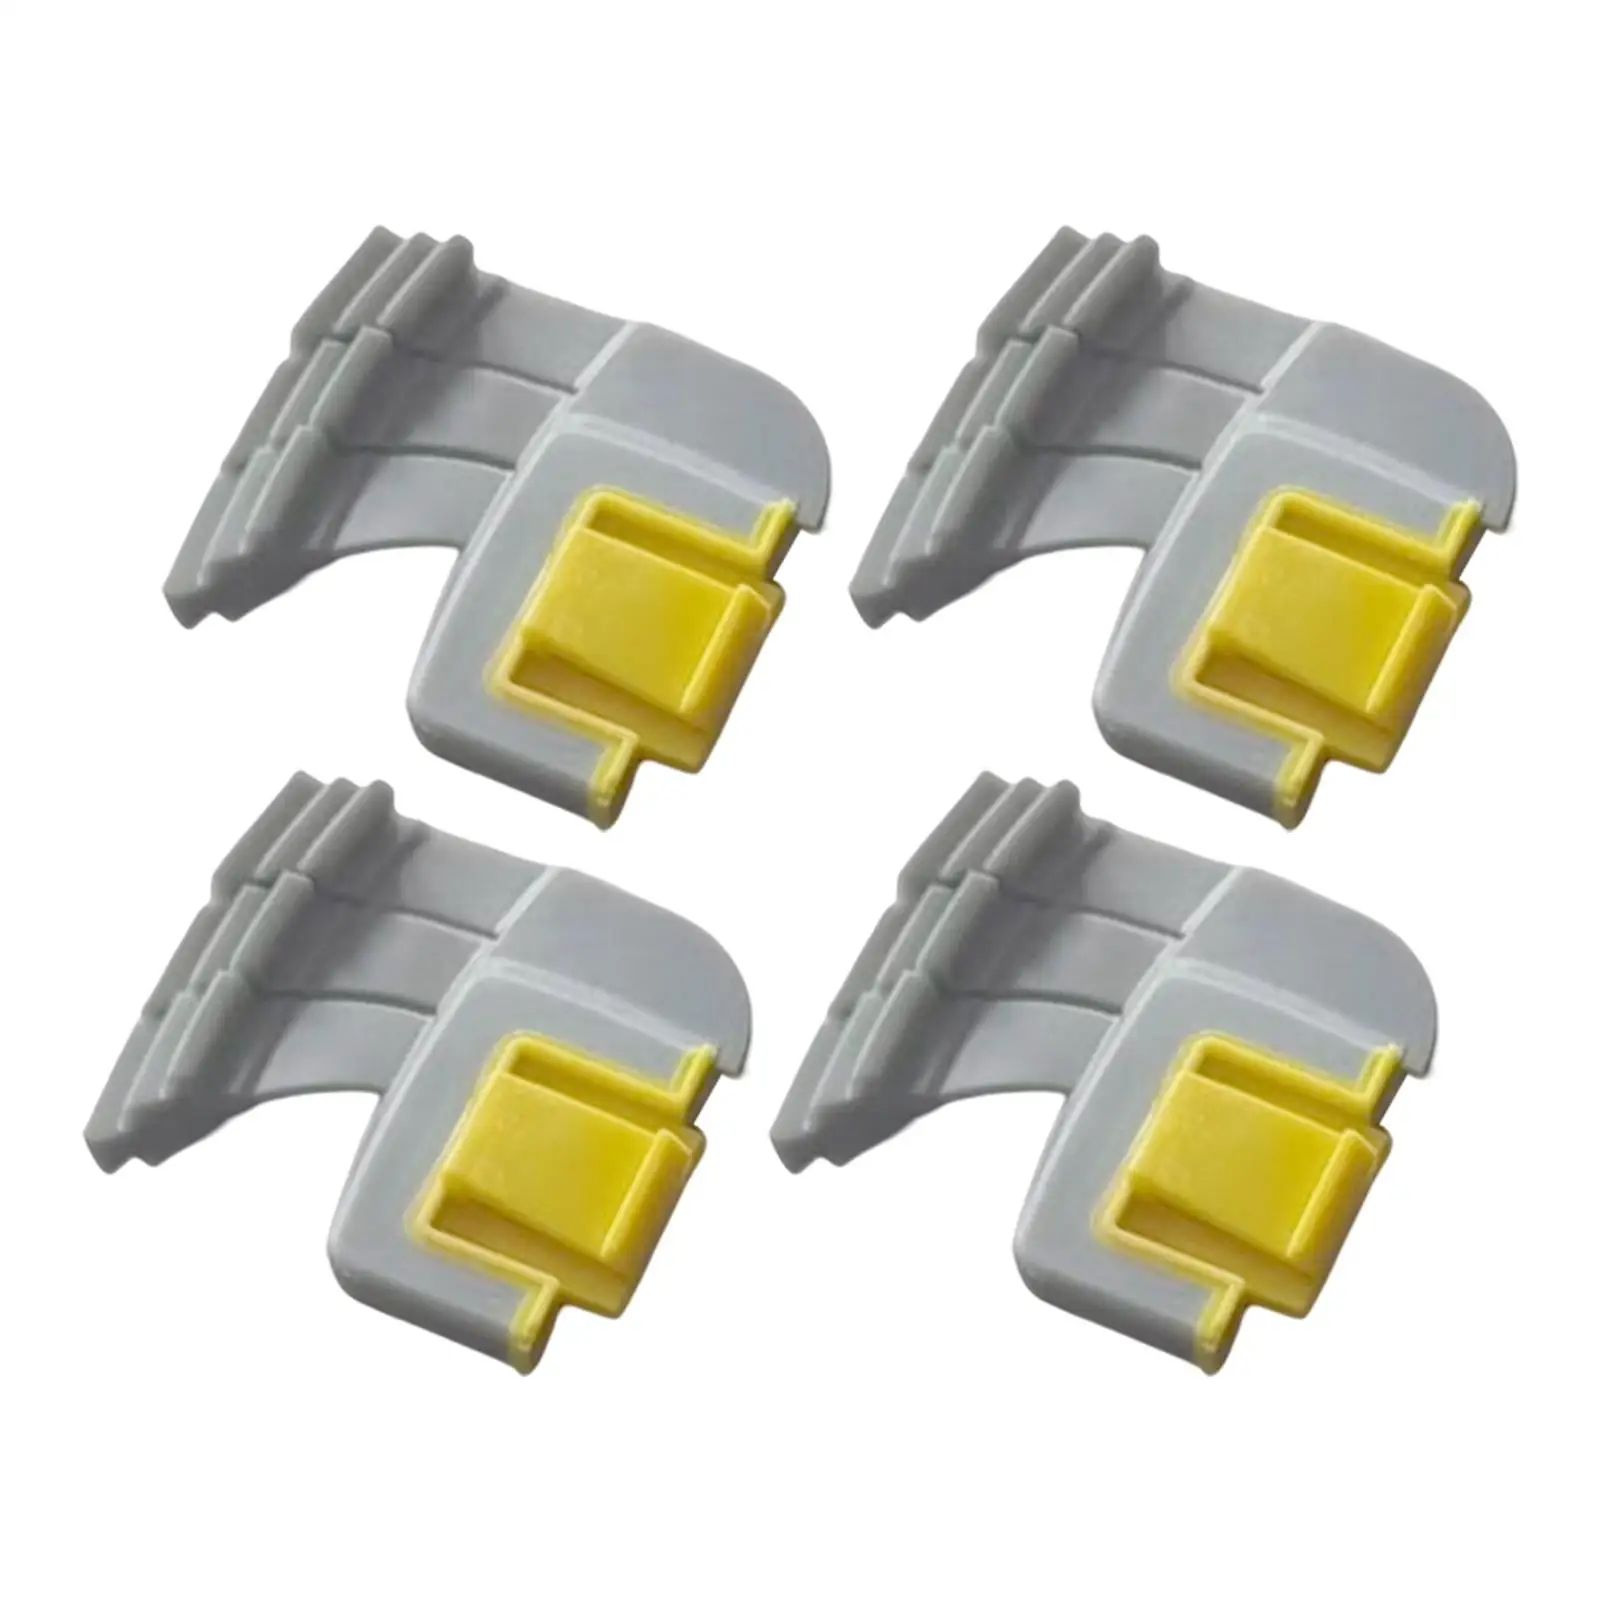 4Pcs Cyclonic Scrubbing Brush for R0714400 Suction Robotic Pool Cleaner Accessories